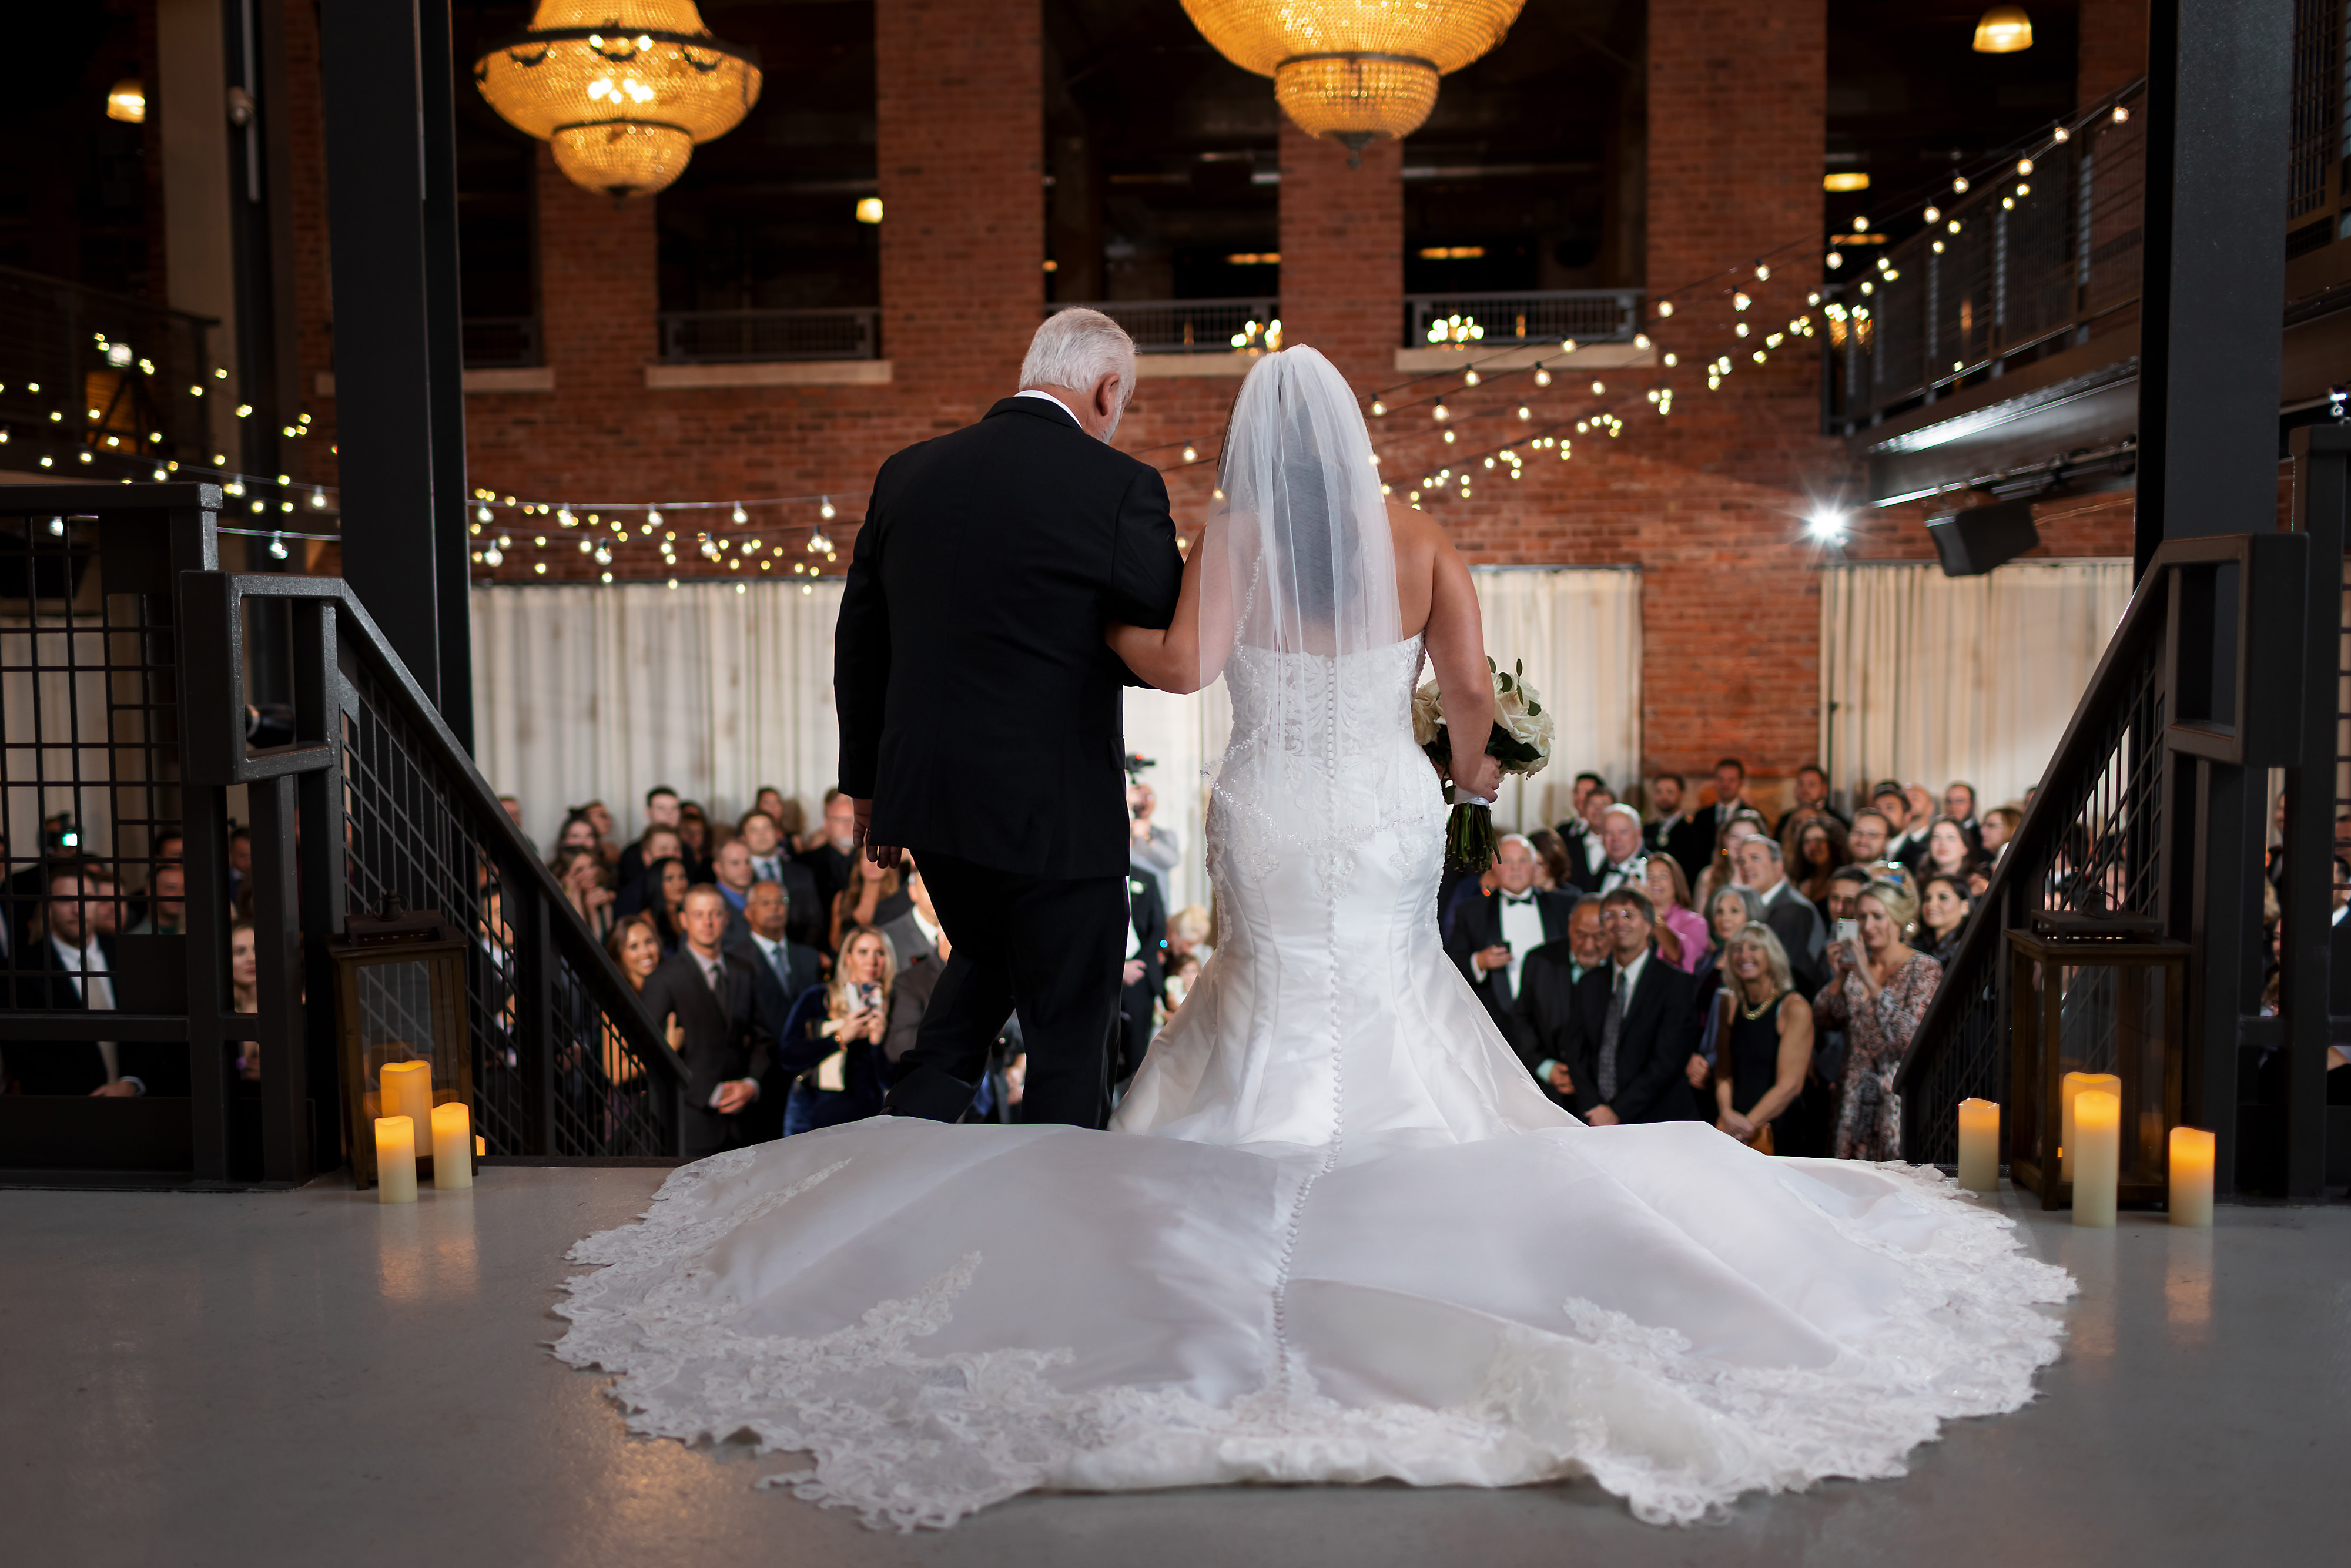 Bride walk down the aisle with father during wedding ceremony at Artifact Events in Chicago's Ravenswood neighborhood.